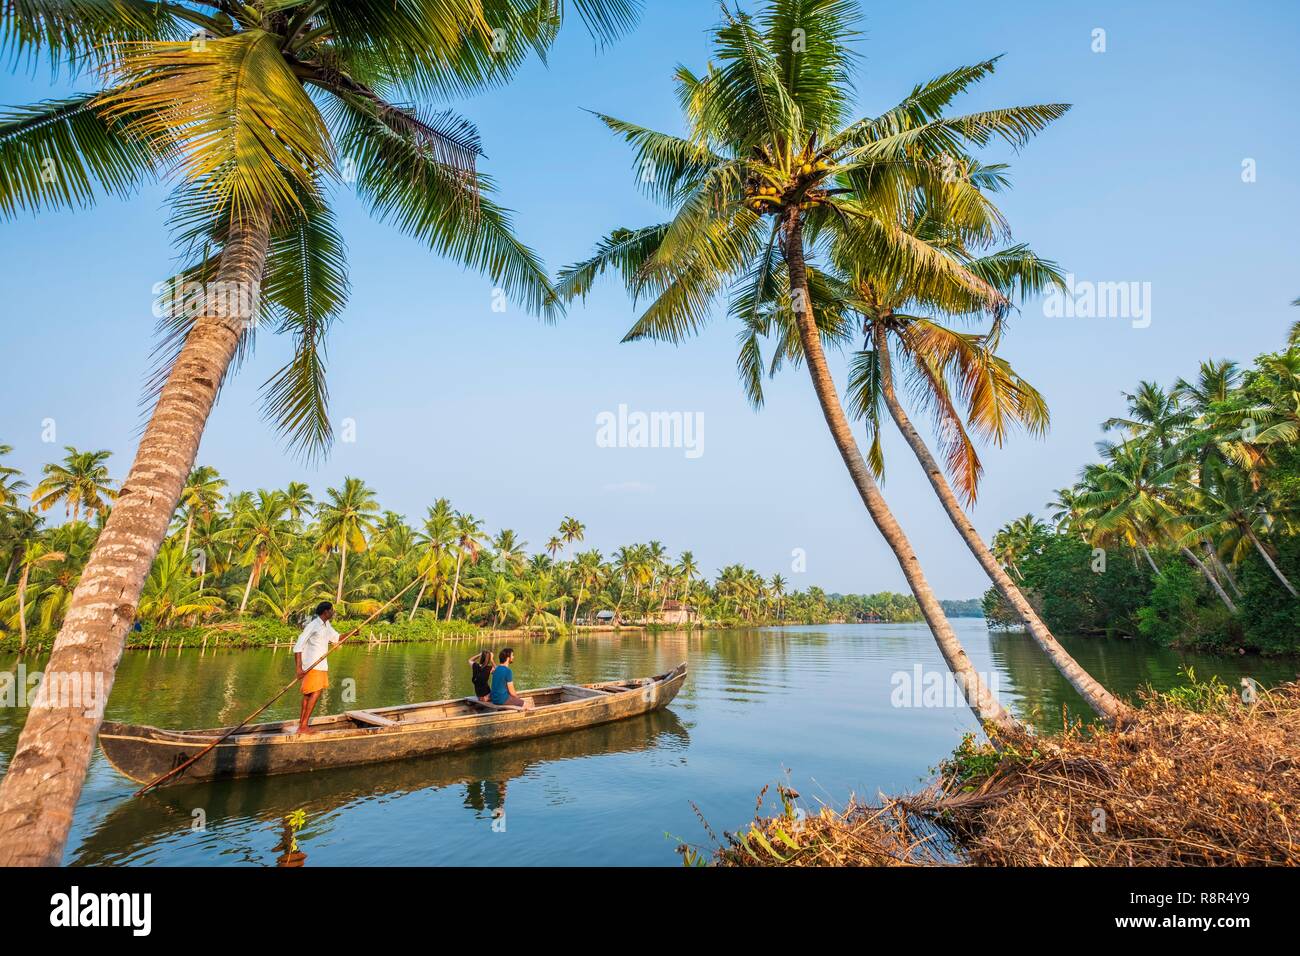 India, state of Kerala, Kollam district, Munroe island or Munroturuttu, inland island at the confluence of Ashtamudi Lake and Kallada River, backwaters (lagoons and channels networks) sightseeing by boat Stock Photo